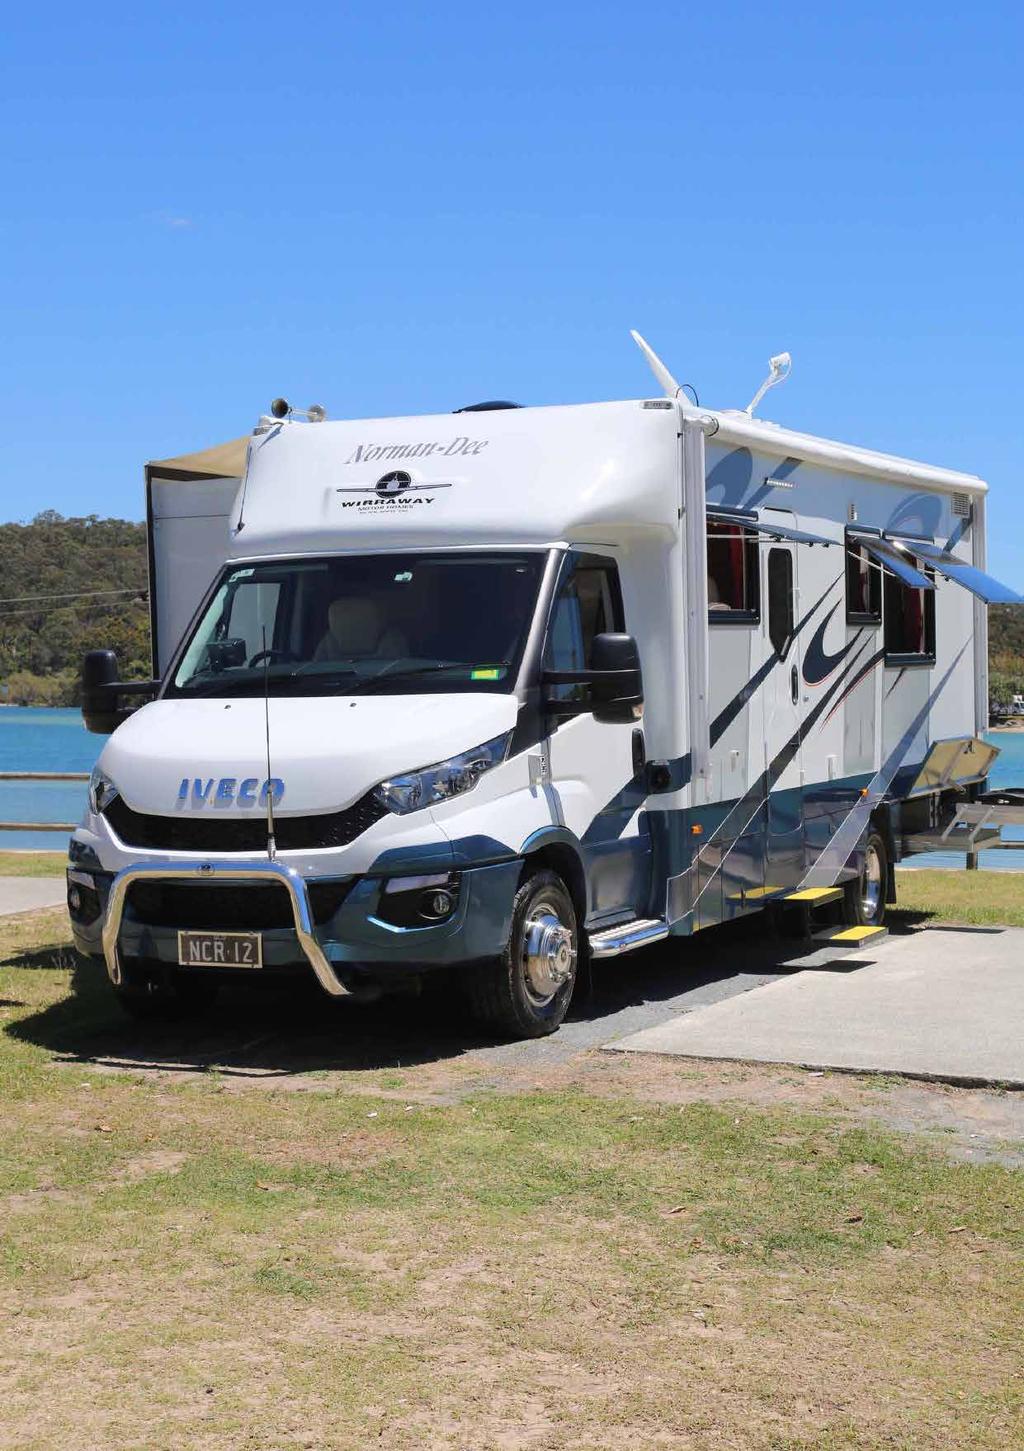 58 Day Test Specs GENERAL Make Model Type Wirraway Evolution 280 SL B-class Berths 2 Approved Seating 4 Licence Light Rigid (LR) VEHICLE Make/Model Engine Power Torque Gearbox Safety Fuel Iveco Daily